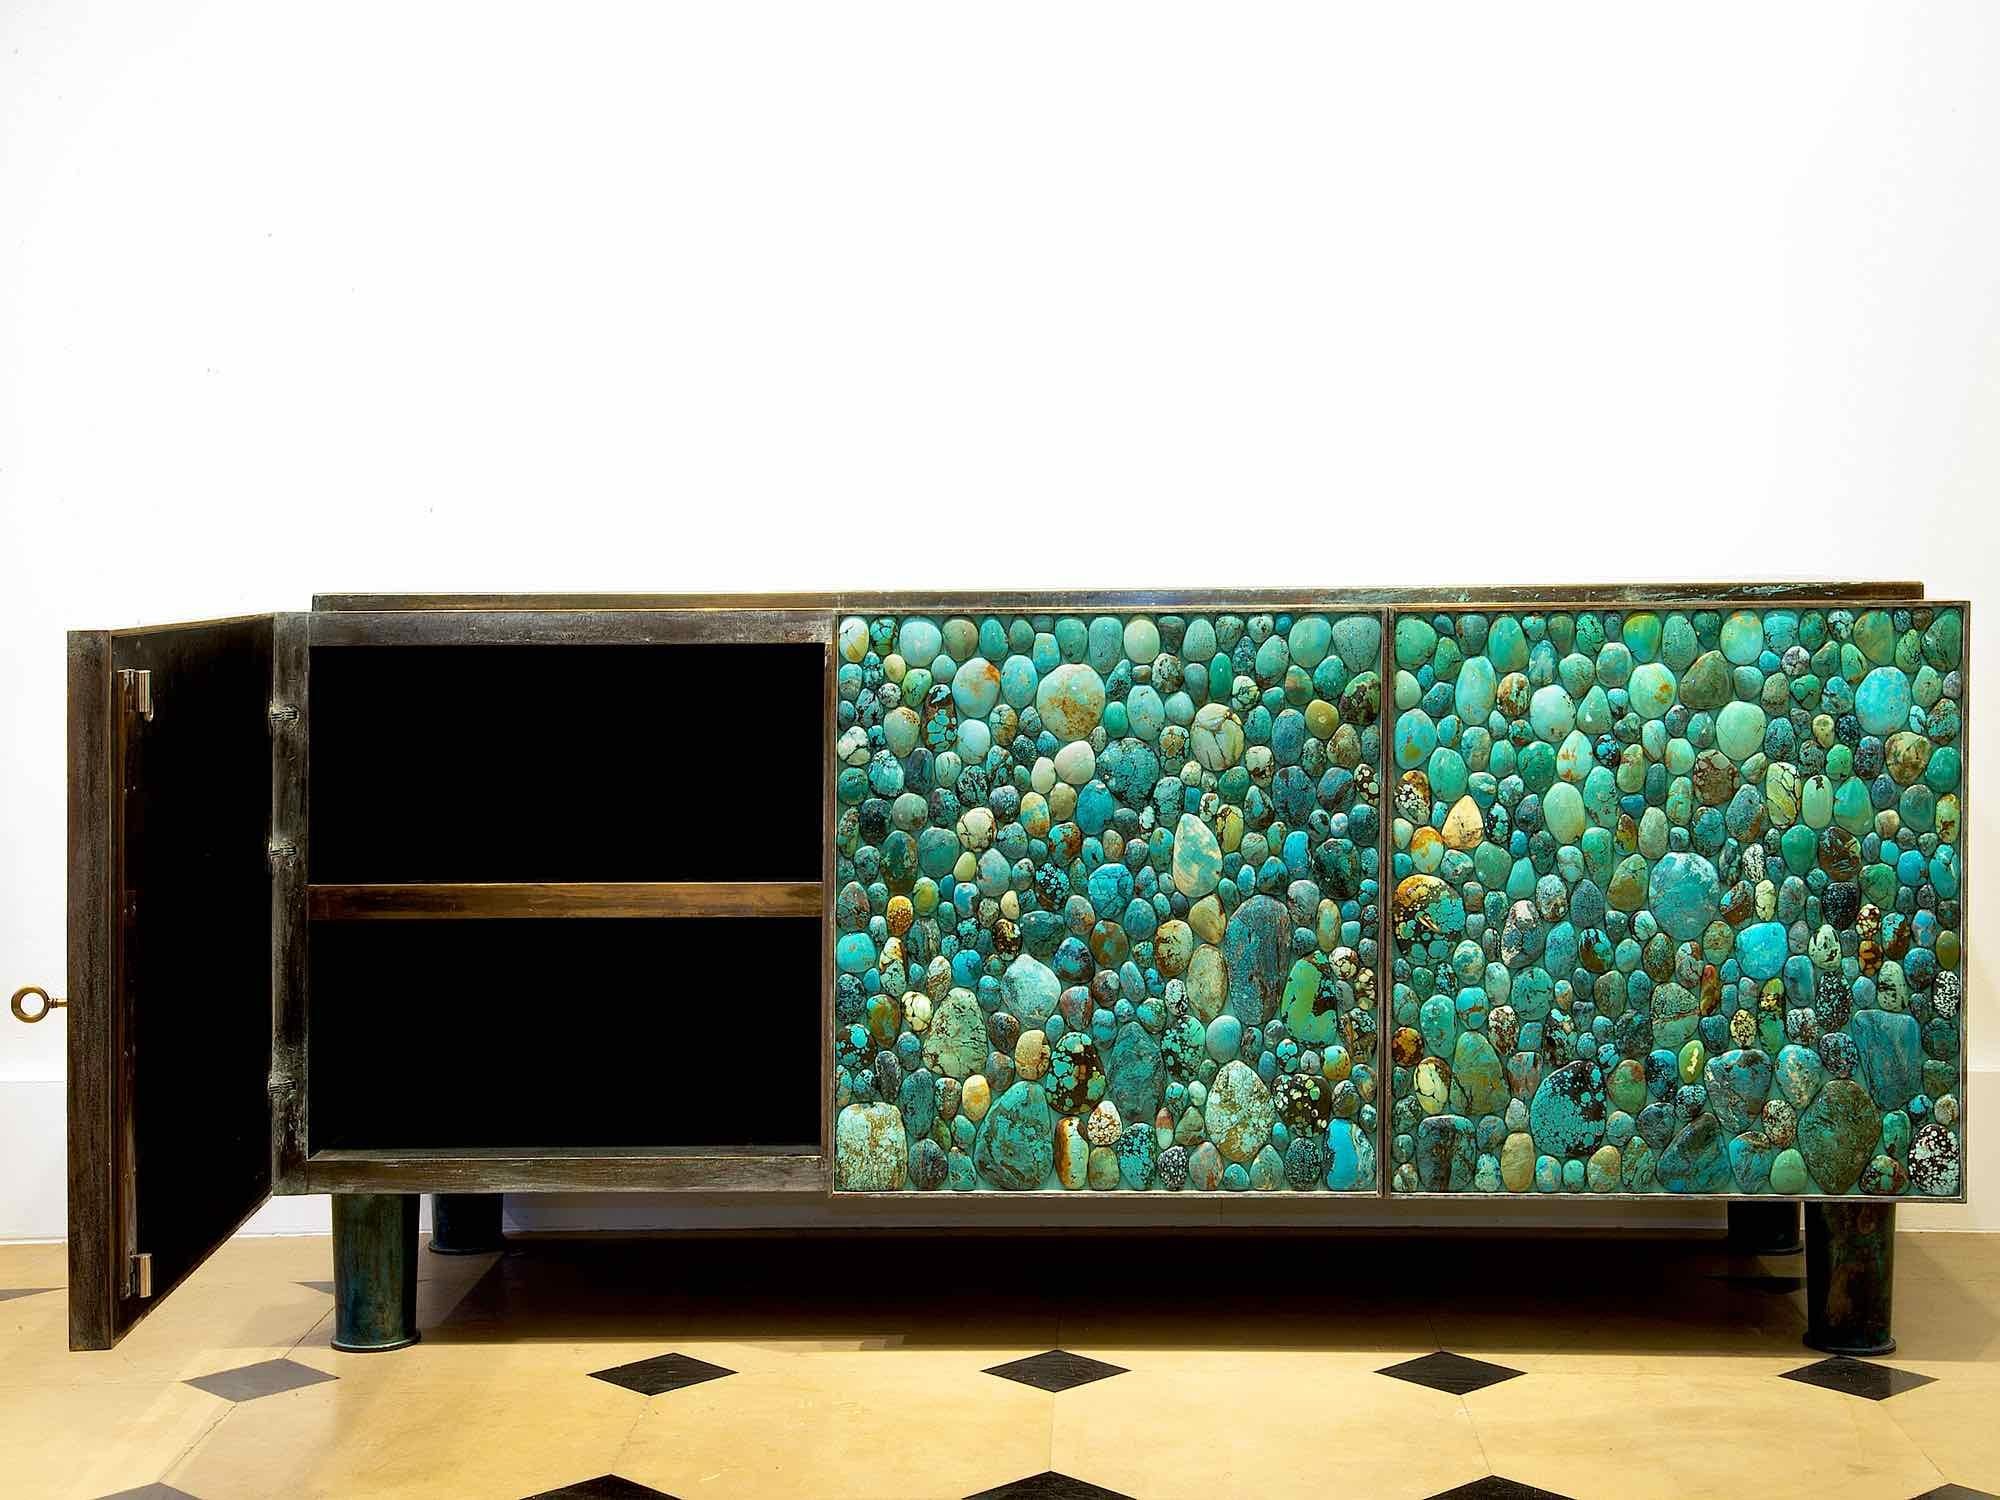 KAM TIN
Turquoise sideboard
Natural turquoise cabochons, patinated brass
The top plate, frame and feet are in patinated brass
France, 2013
Unique piece 
This piece can also be made to order with bespoke dimension on request.